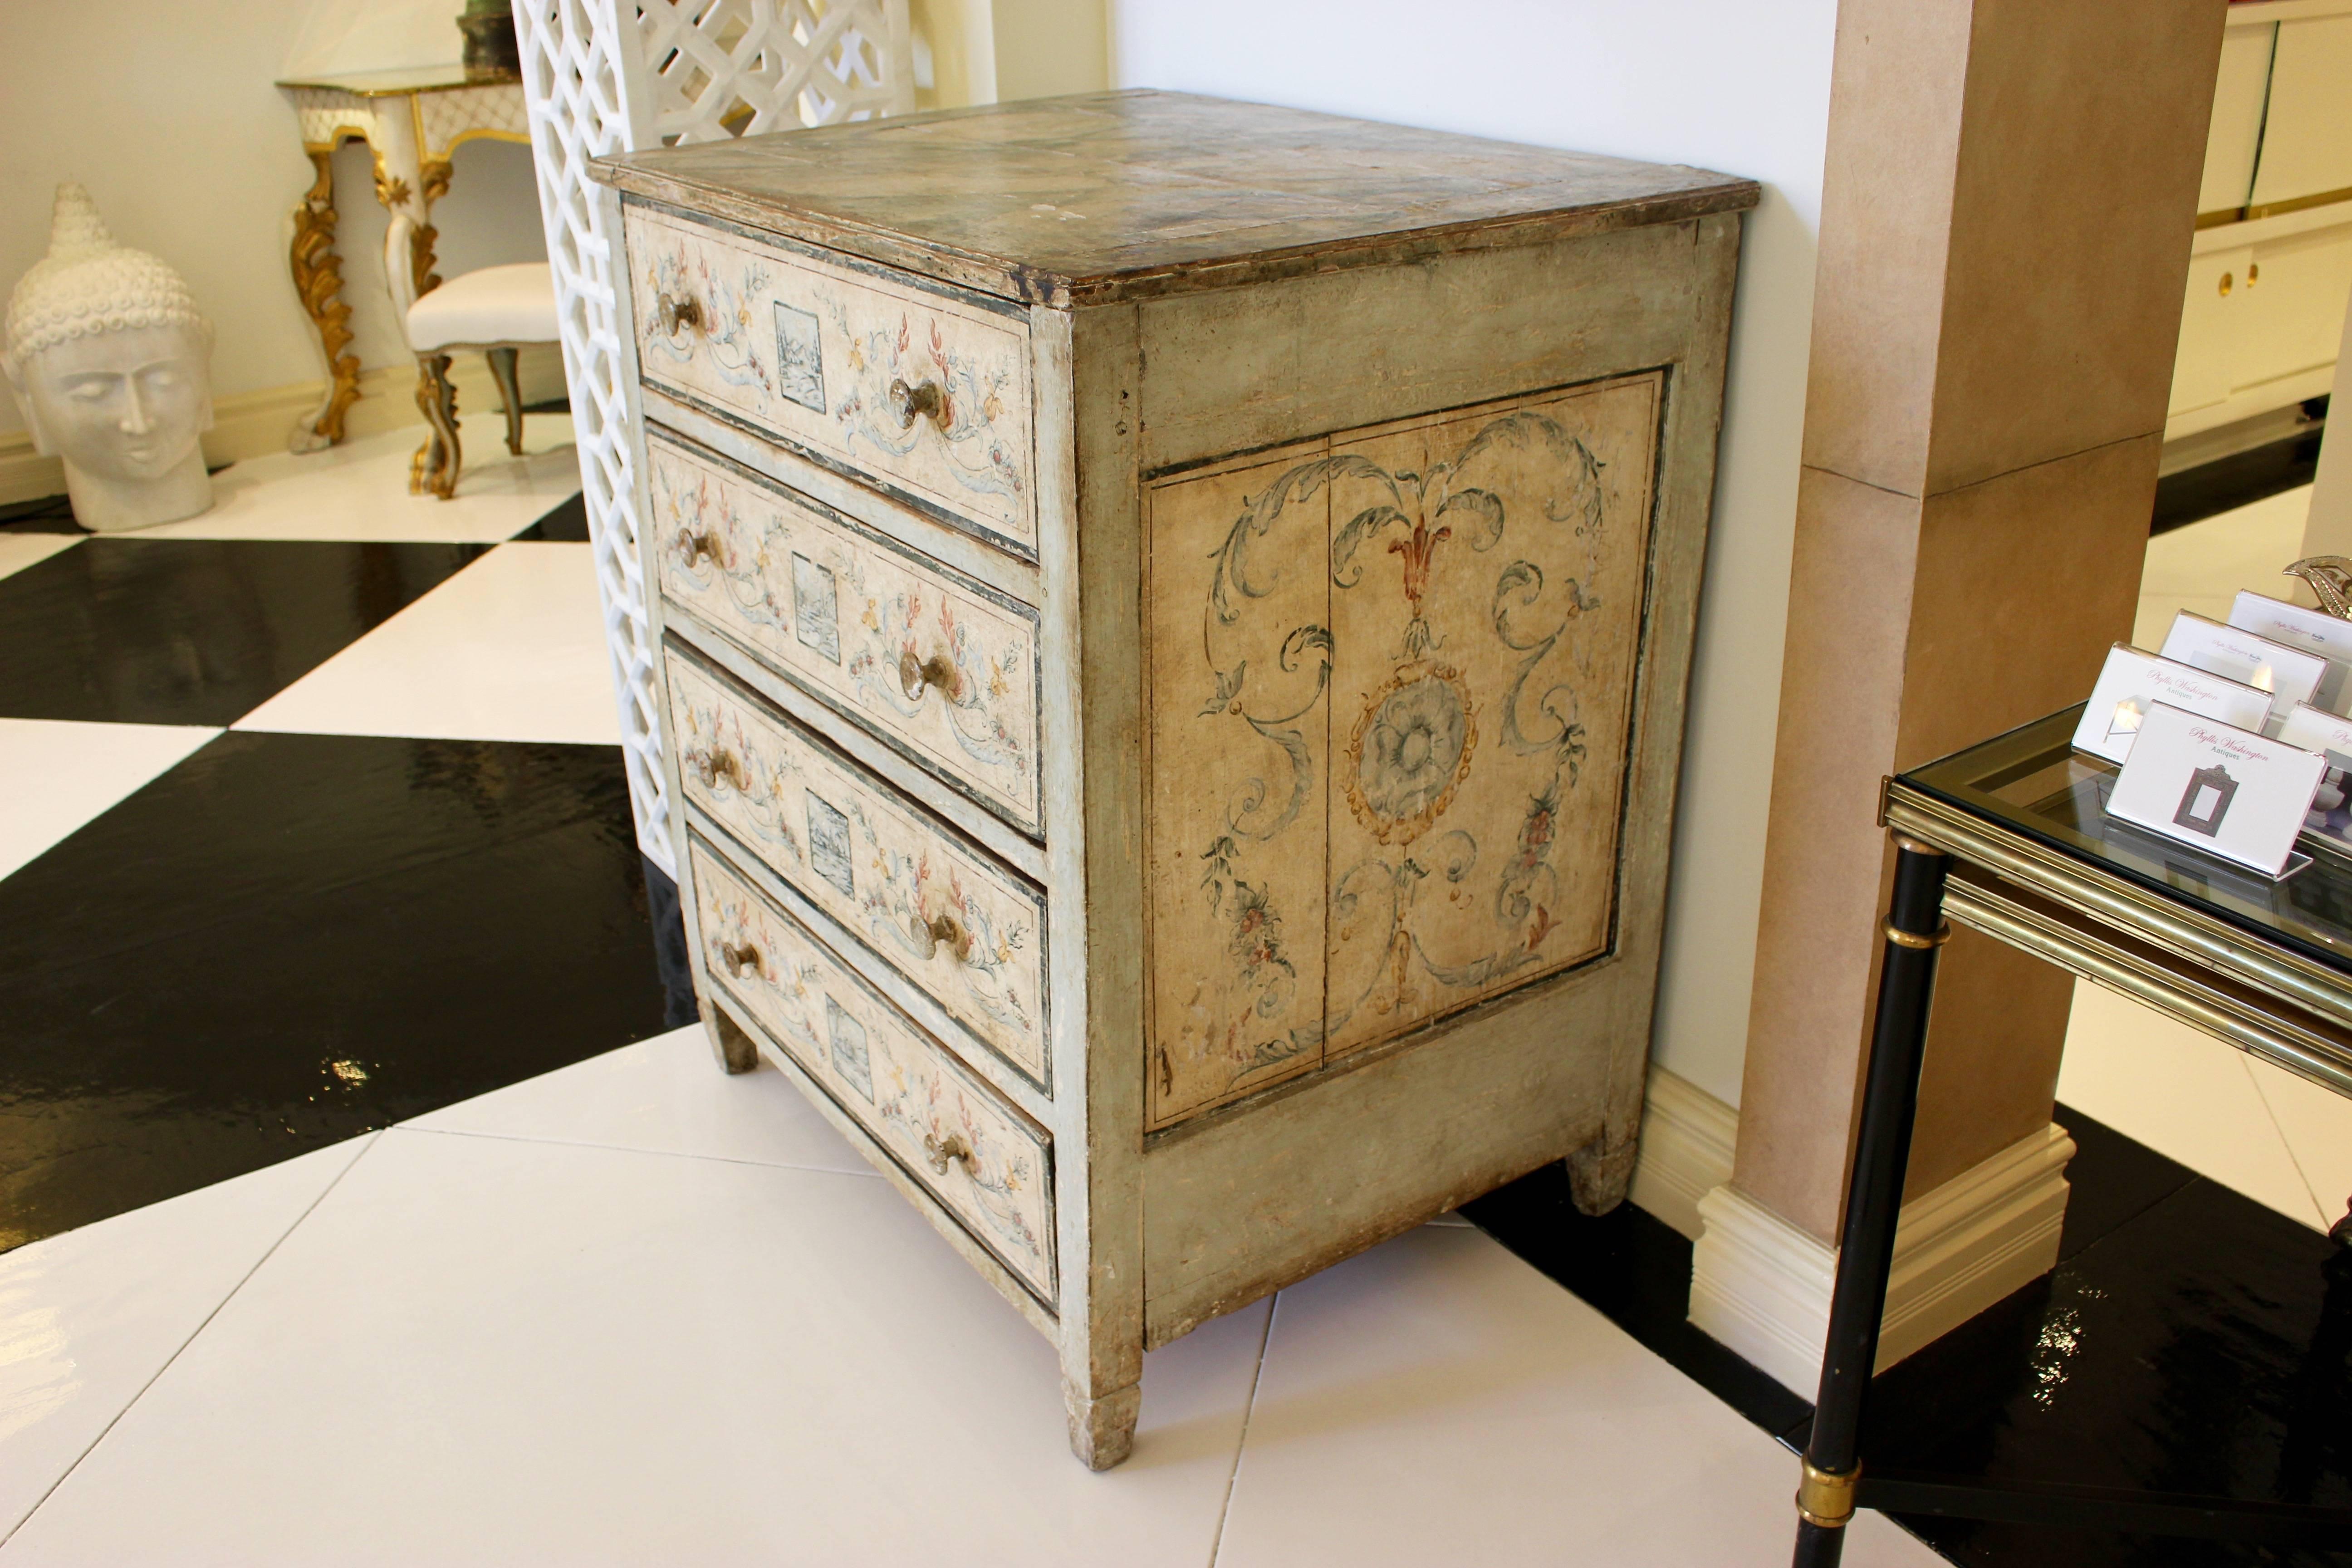 An Italian neoclassical period painted poplar four-drawer commode with hand-painted Pompeian style motifs and faux-marble top. Born in the later years of the 18th century, this exquisite Italian commode witnesses the impact the rediscovery of